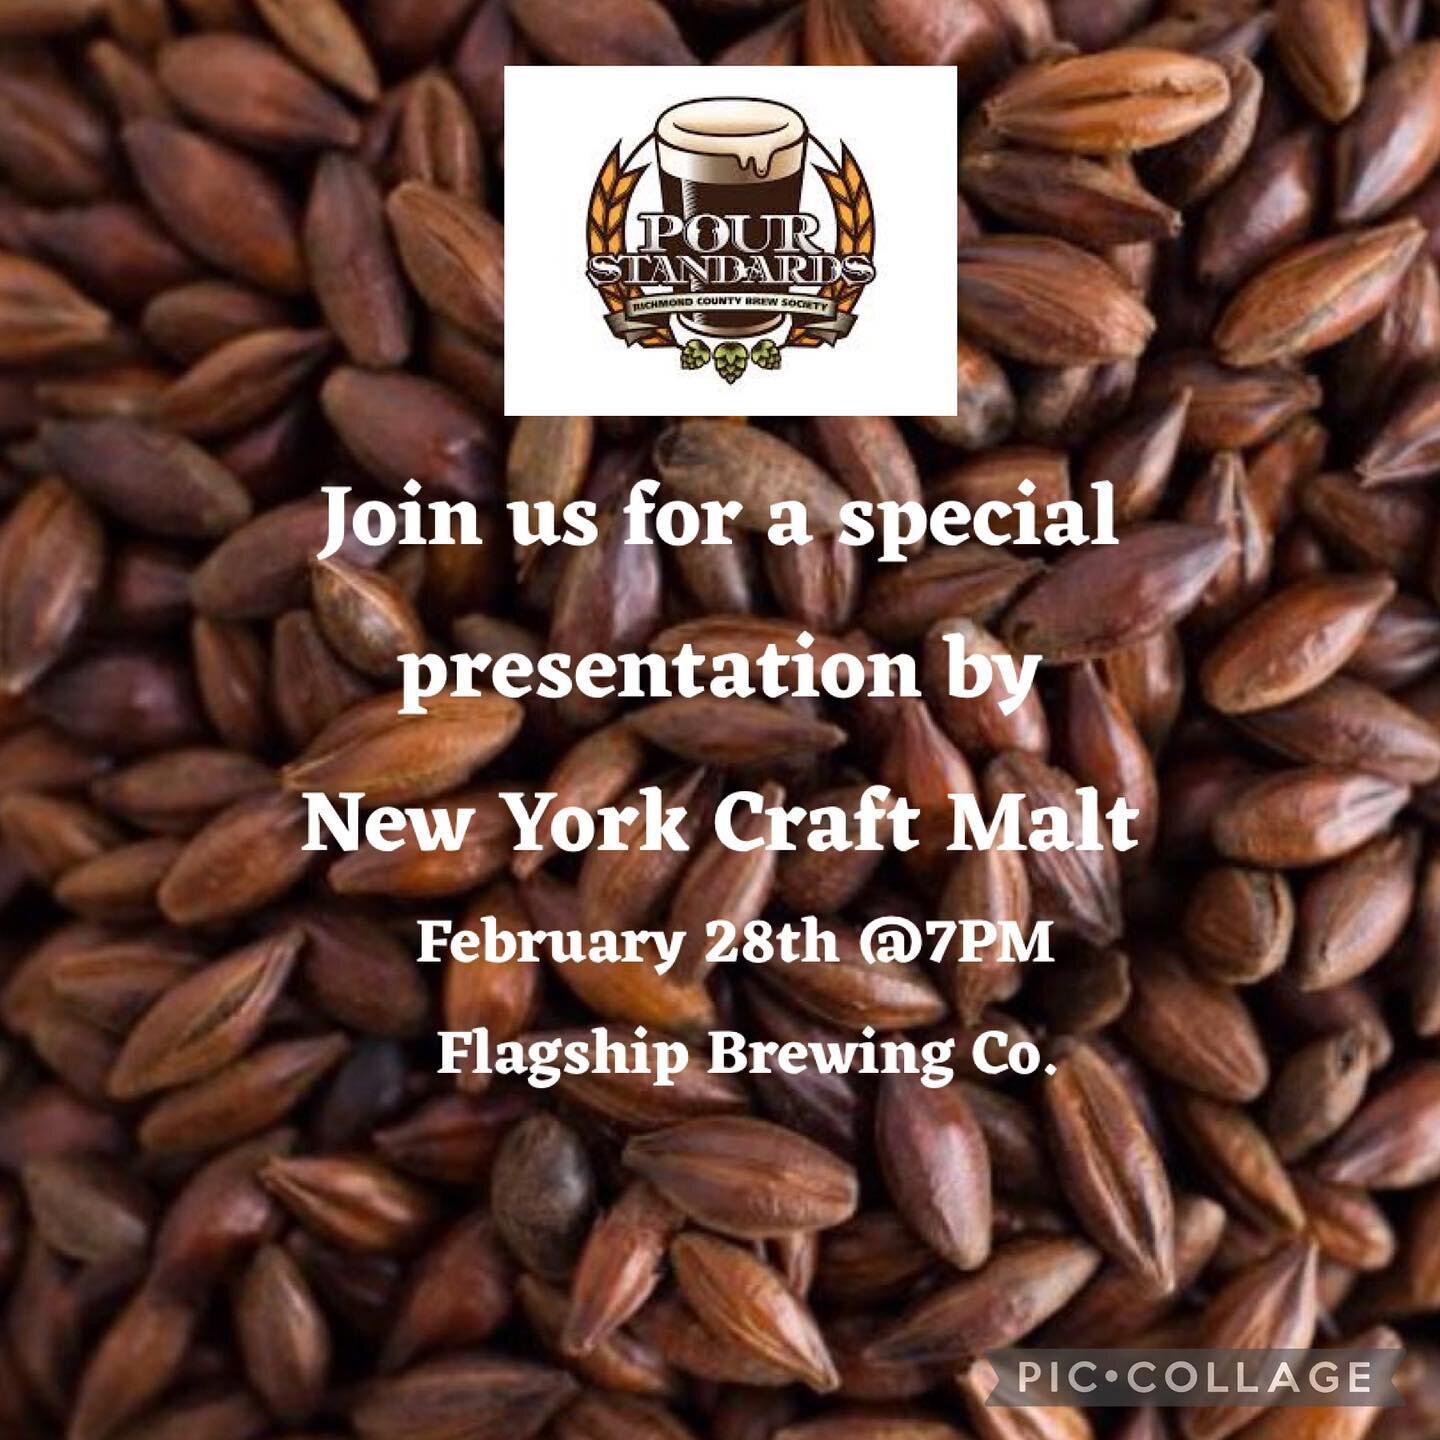 Join us on February 28th for our next meeting! A representative from New York Craft Malt will be there to discuss and answer questions about all things malt.